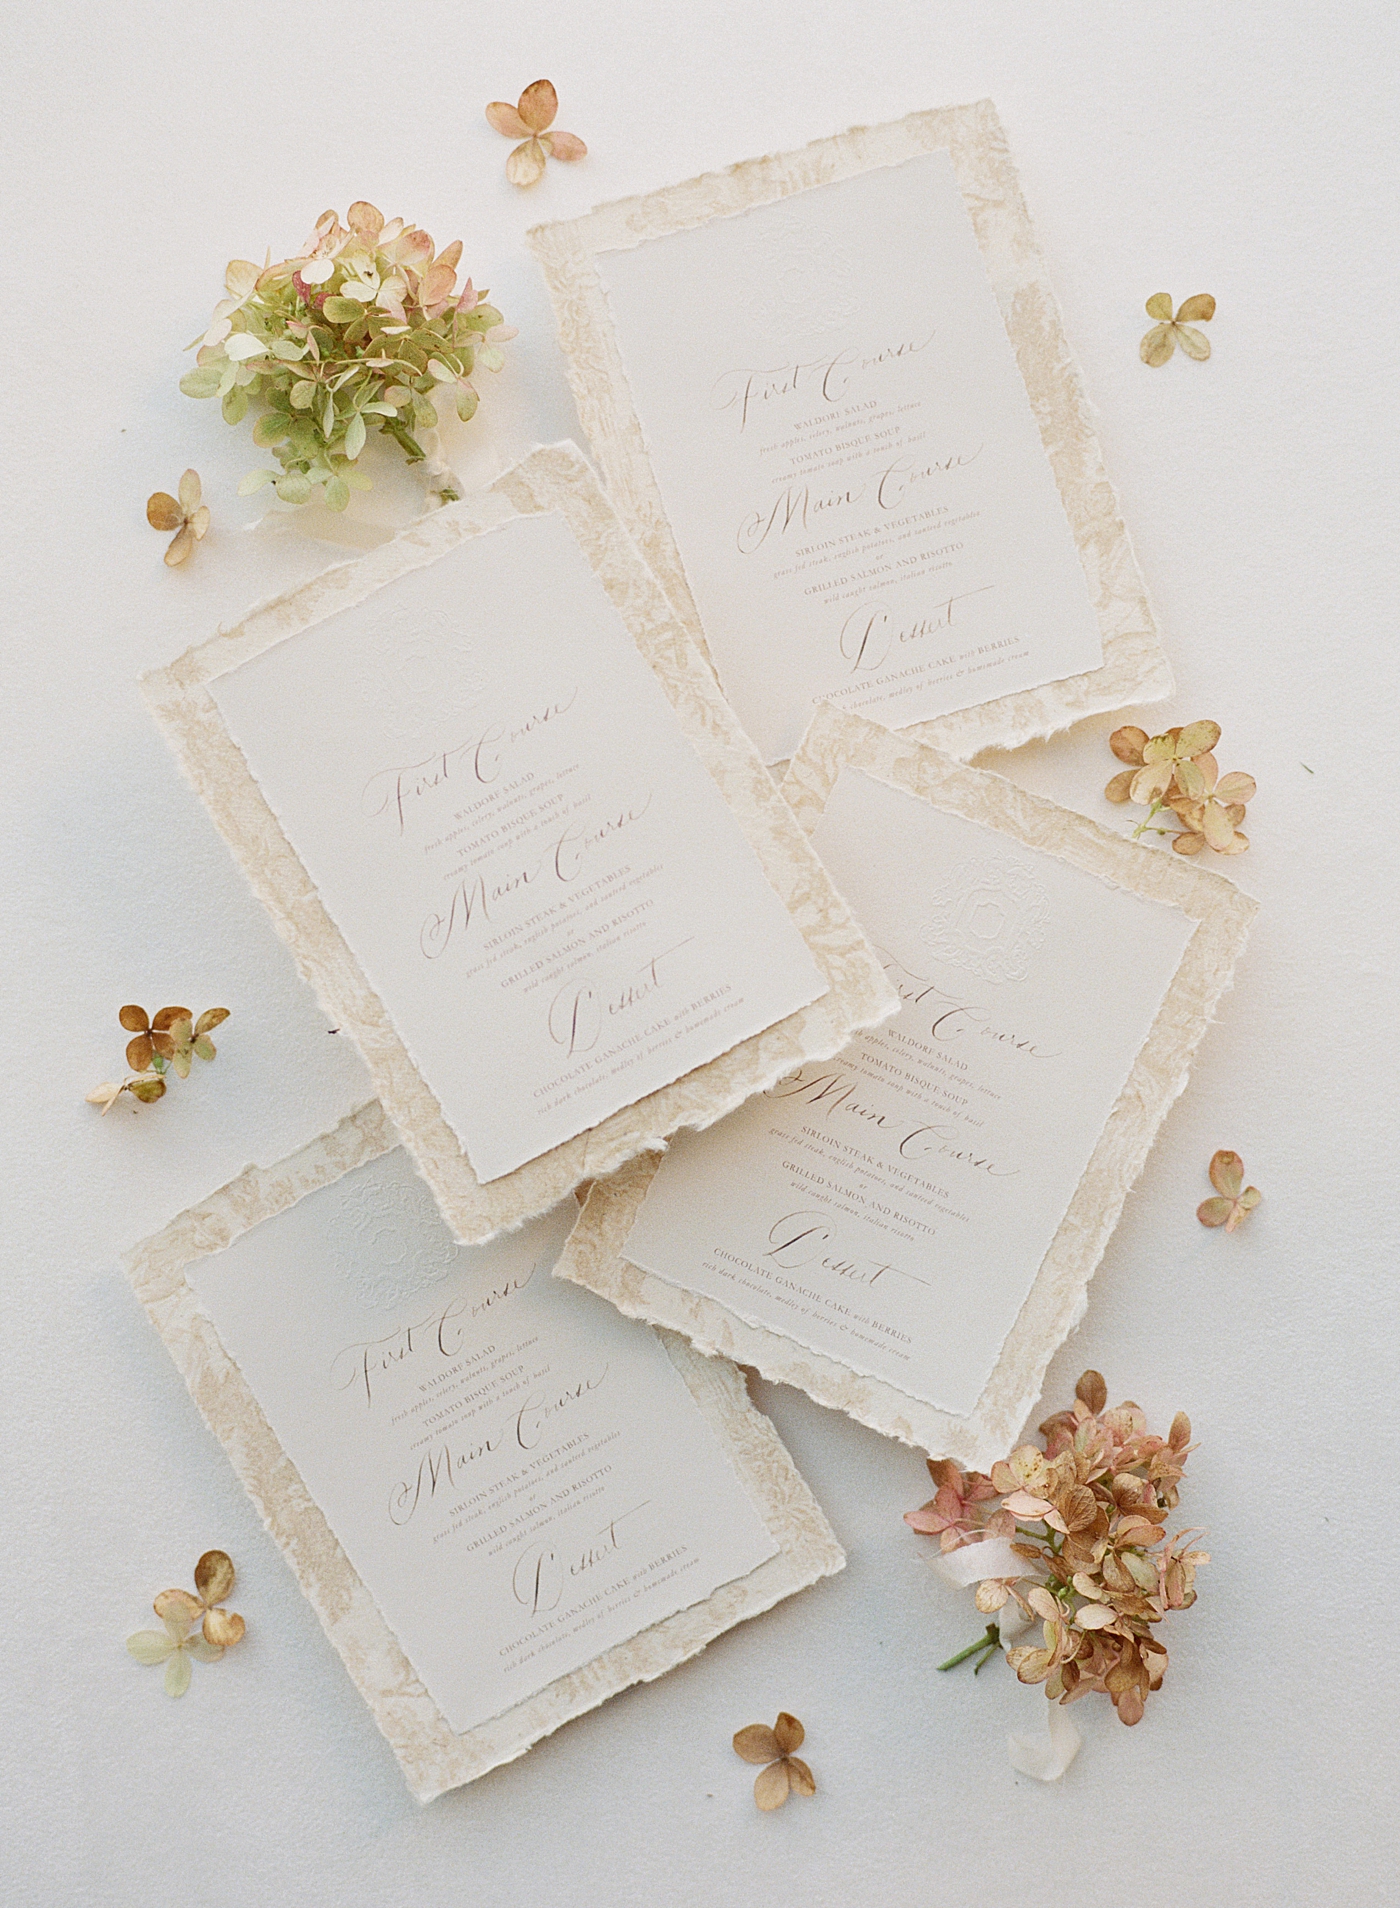 Overhead flat lay of a wedding invitation on scalloped, paper with handwritten calligraphy | Image by Hope Helmuth Photography